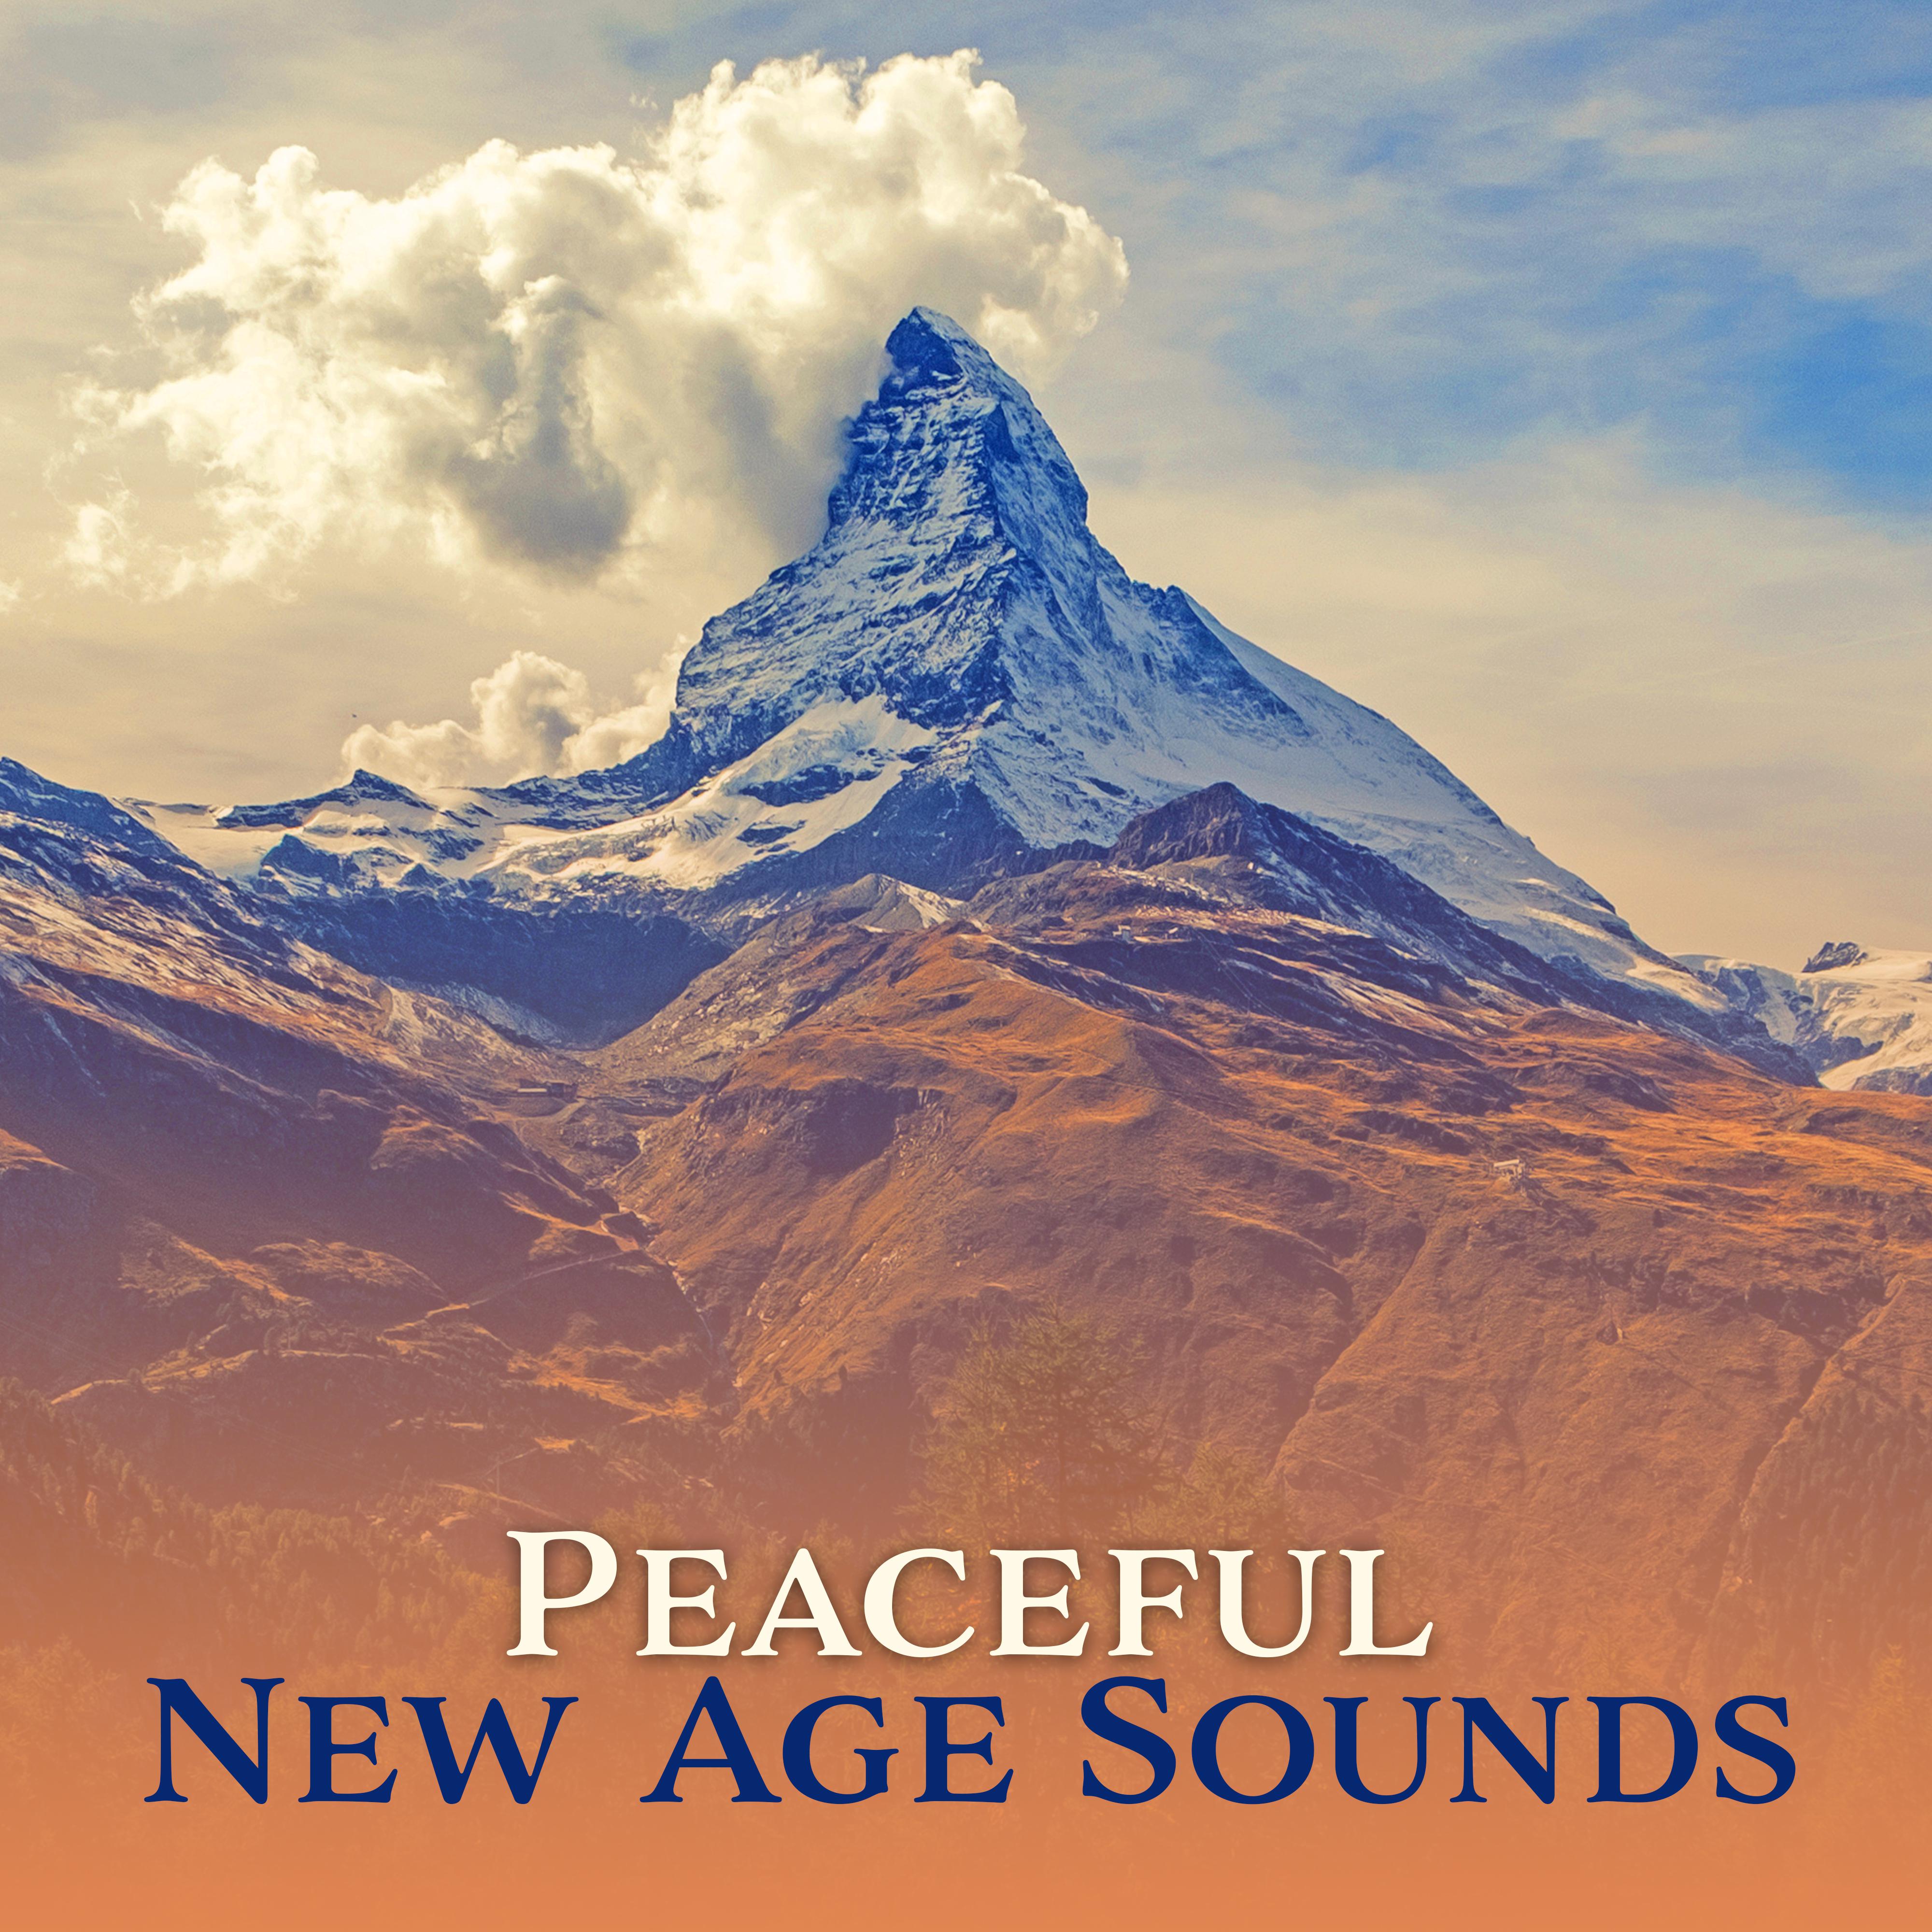 Peaceful New Age Sounds – Calming Waves, Easy Listening, Stress Relief, Inner Peace, Calm Down